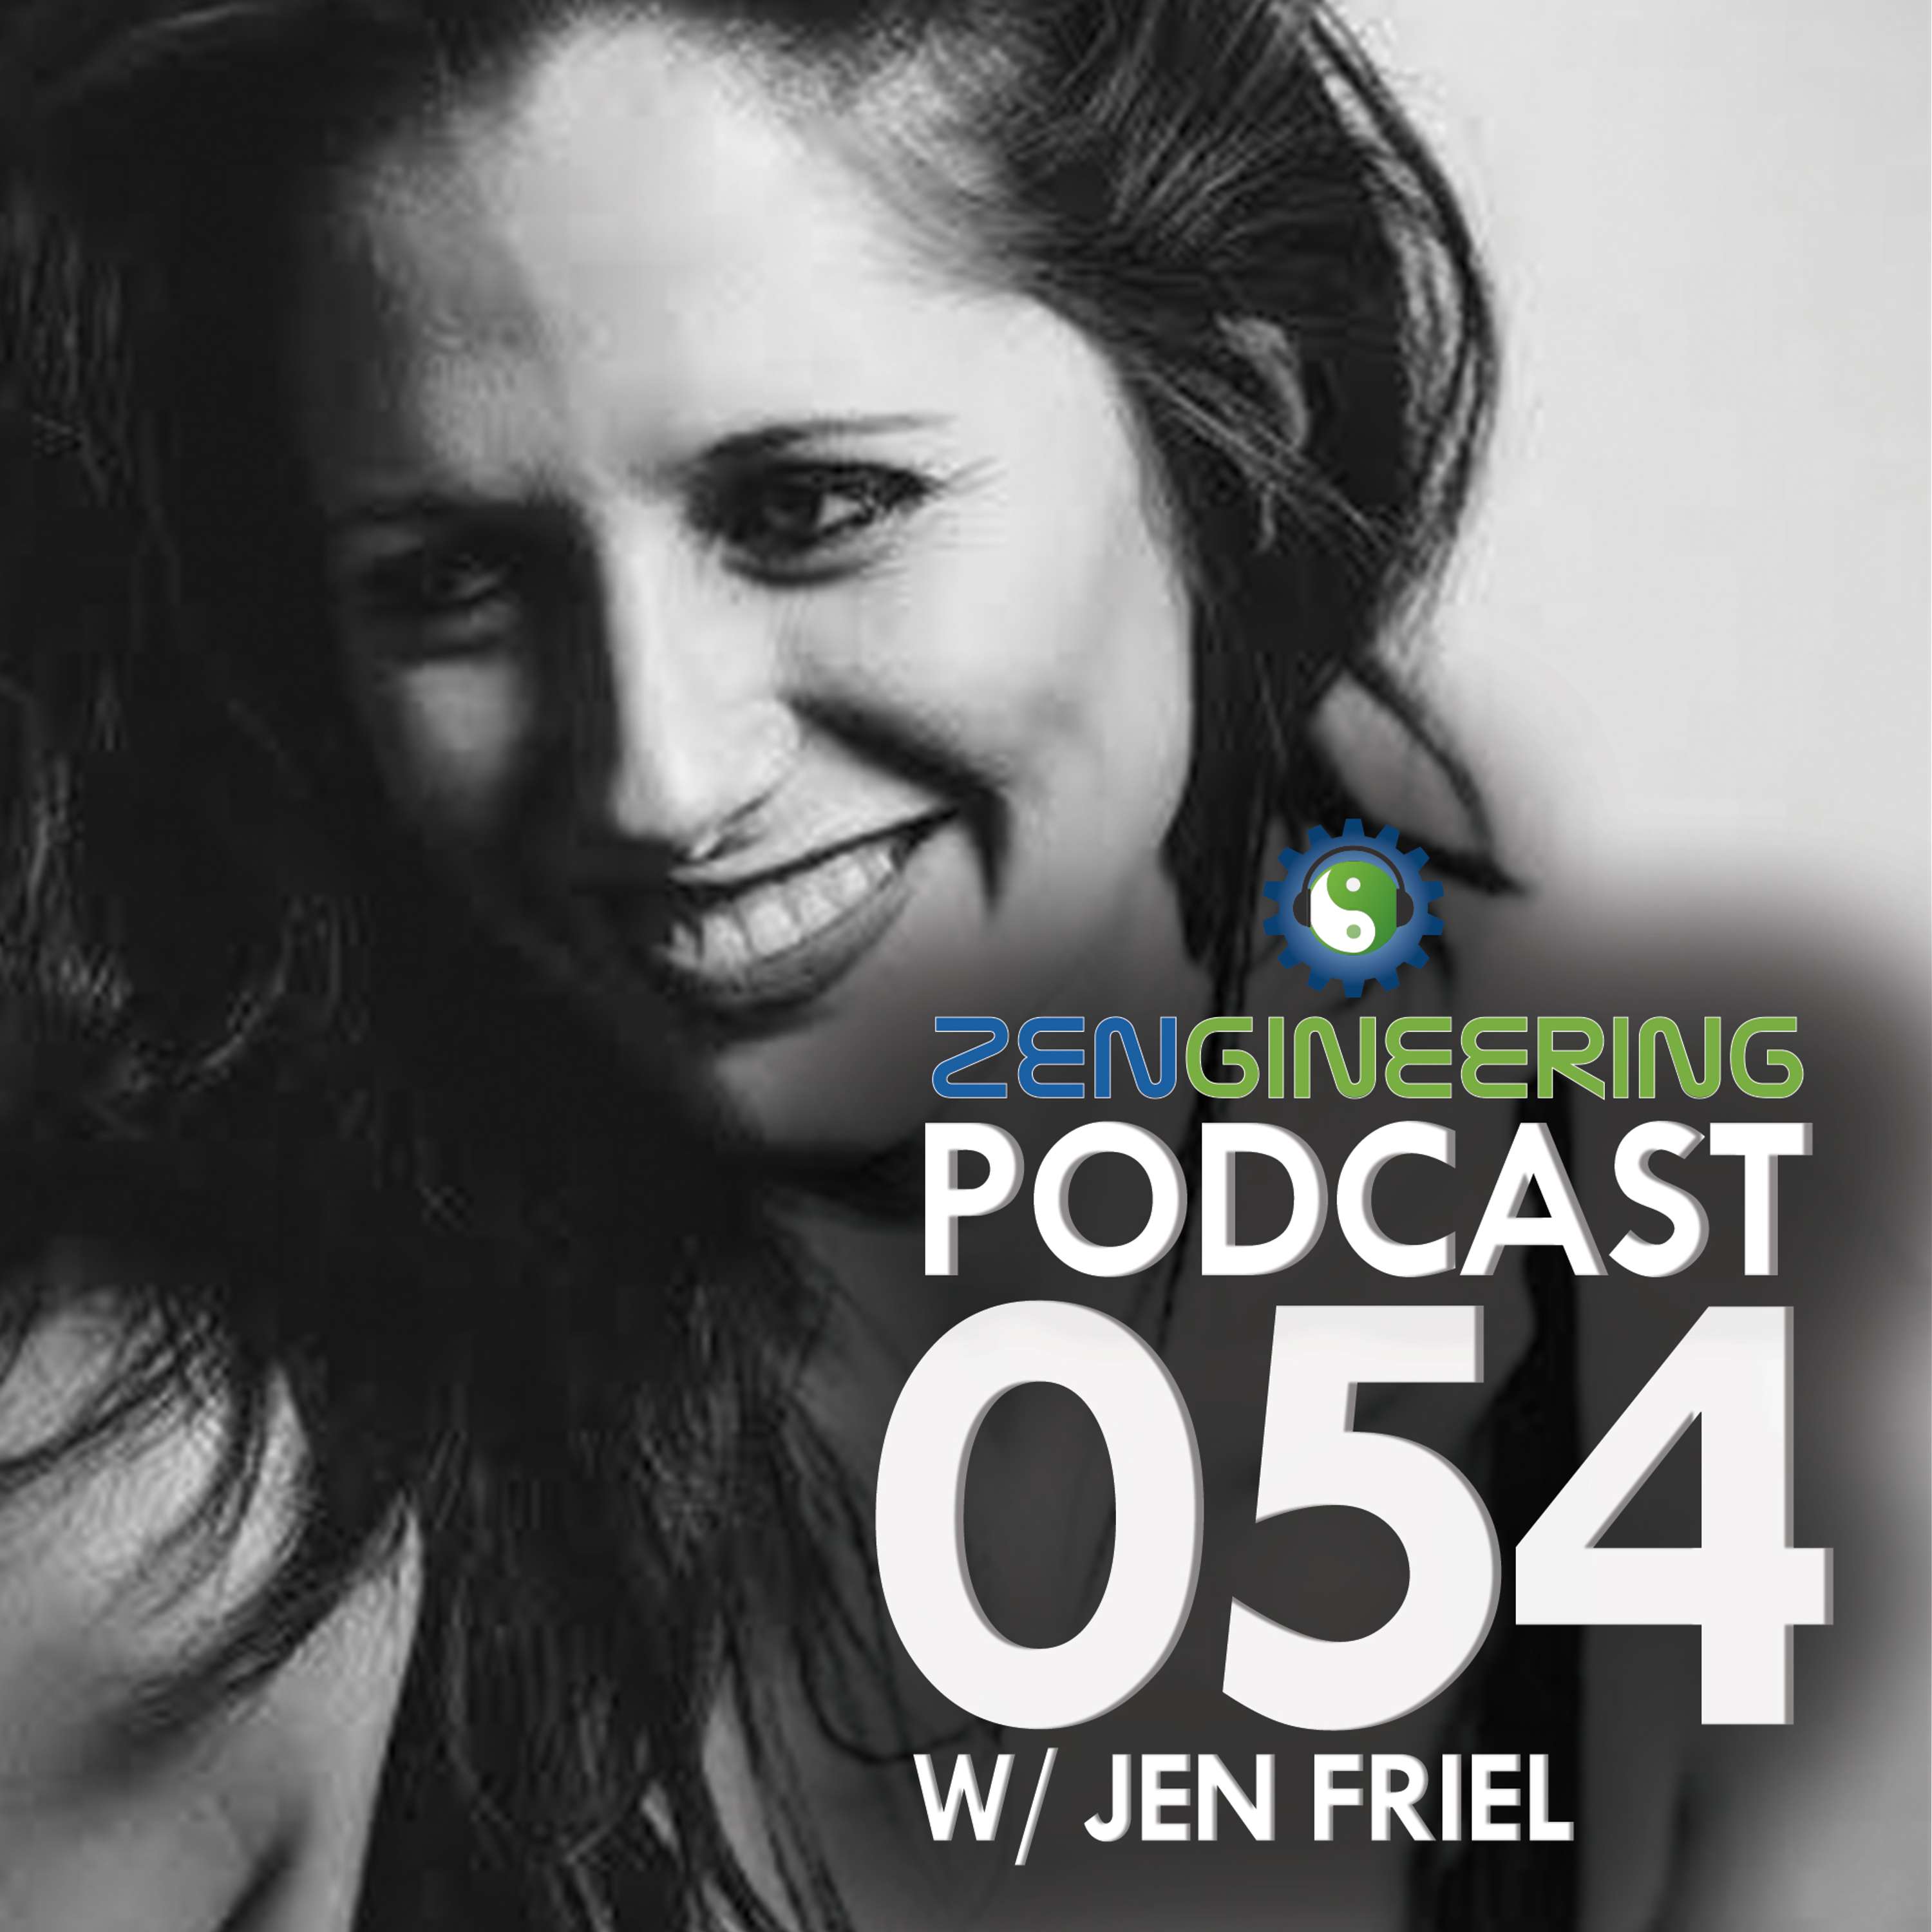 054 - with Jen Friel - On Blogs, Bartering, and Footslaves